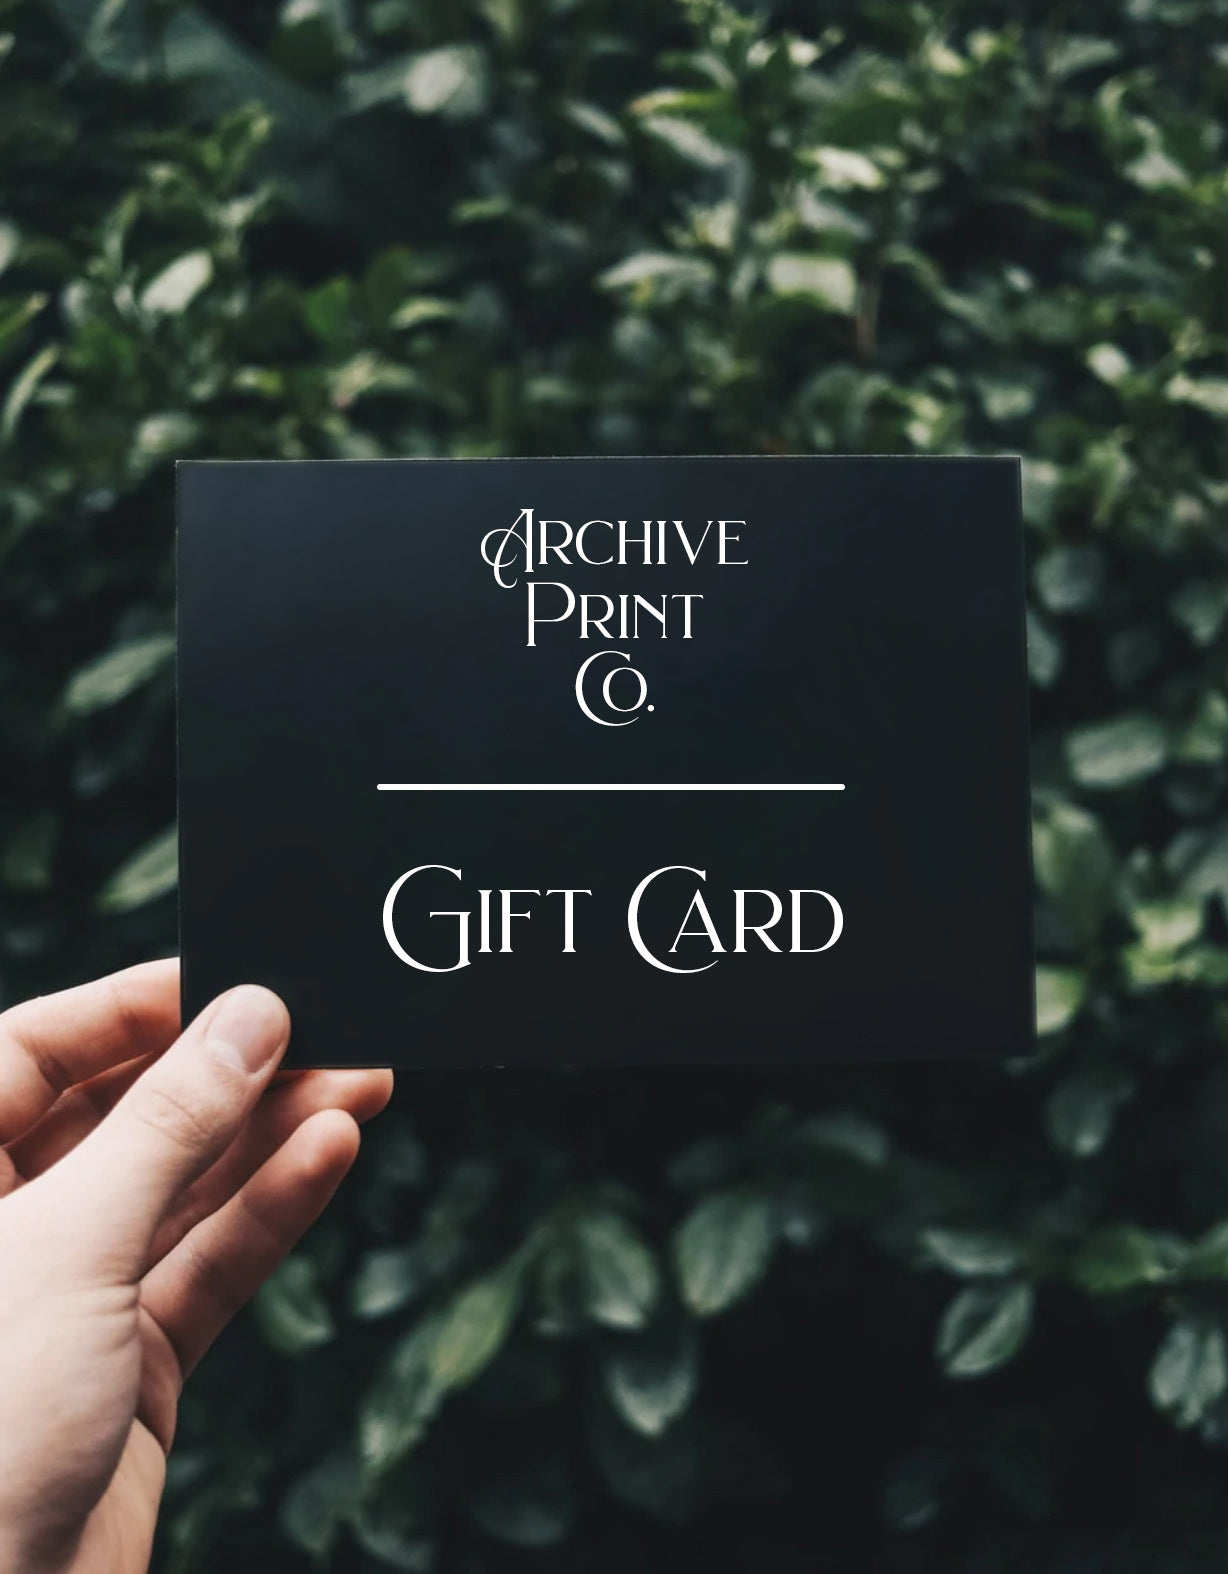 Gift Card | Archive Print Co.